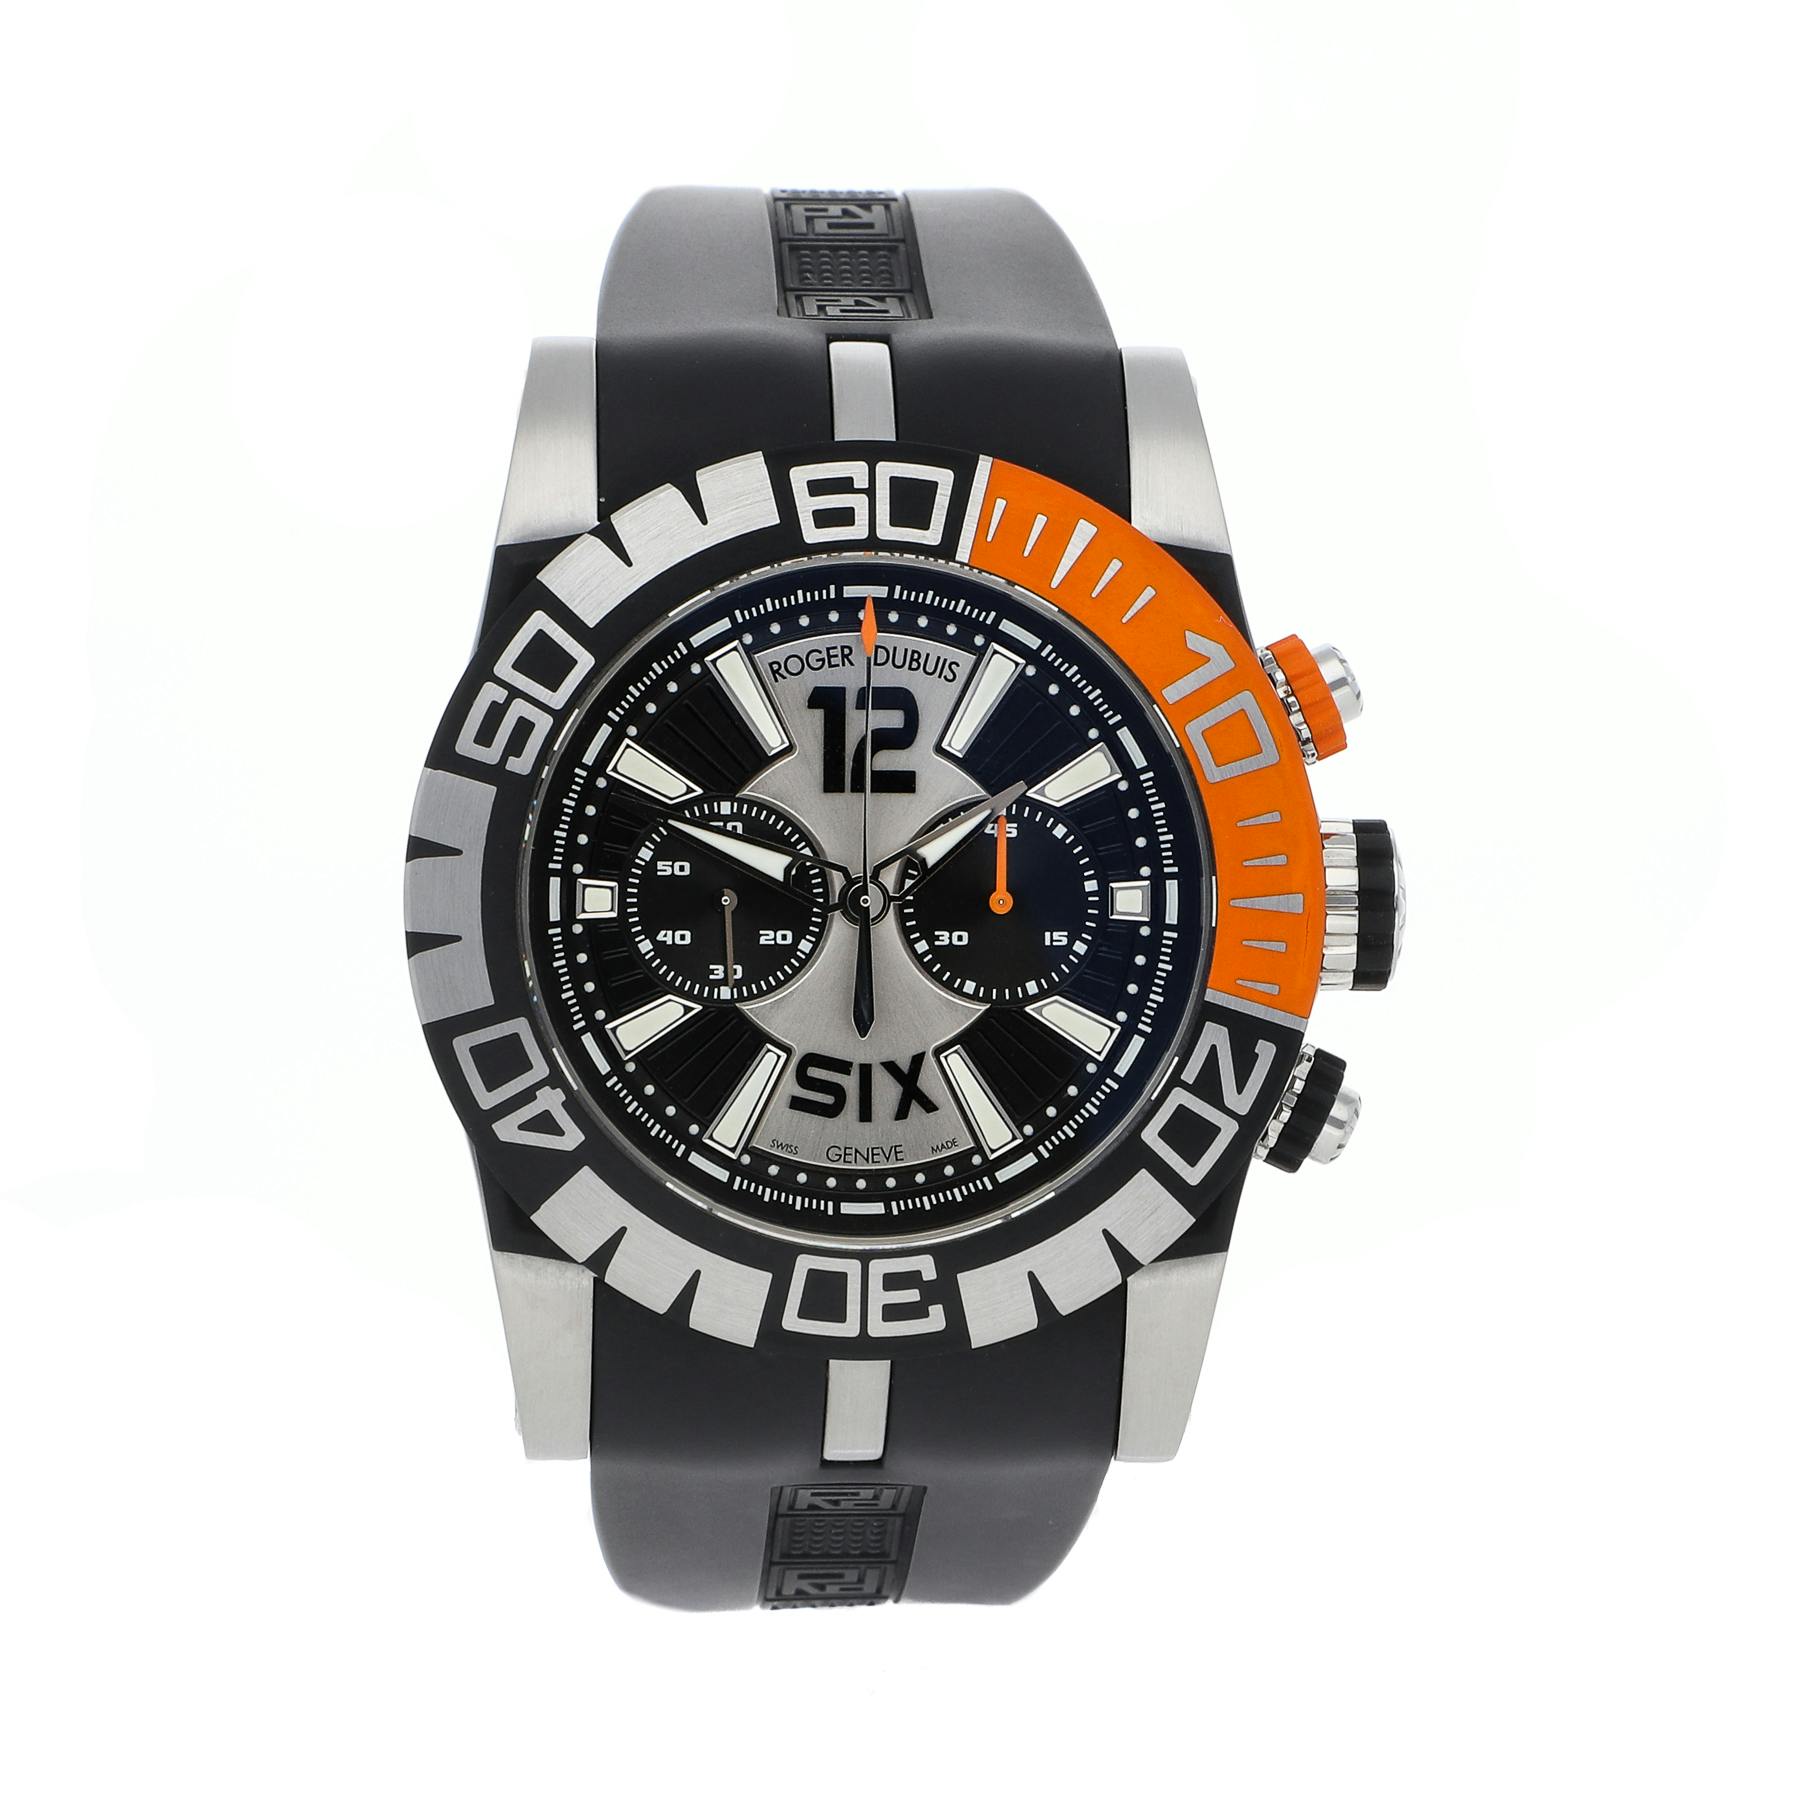 roger dubuis easy diver chronograph